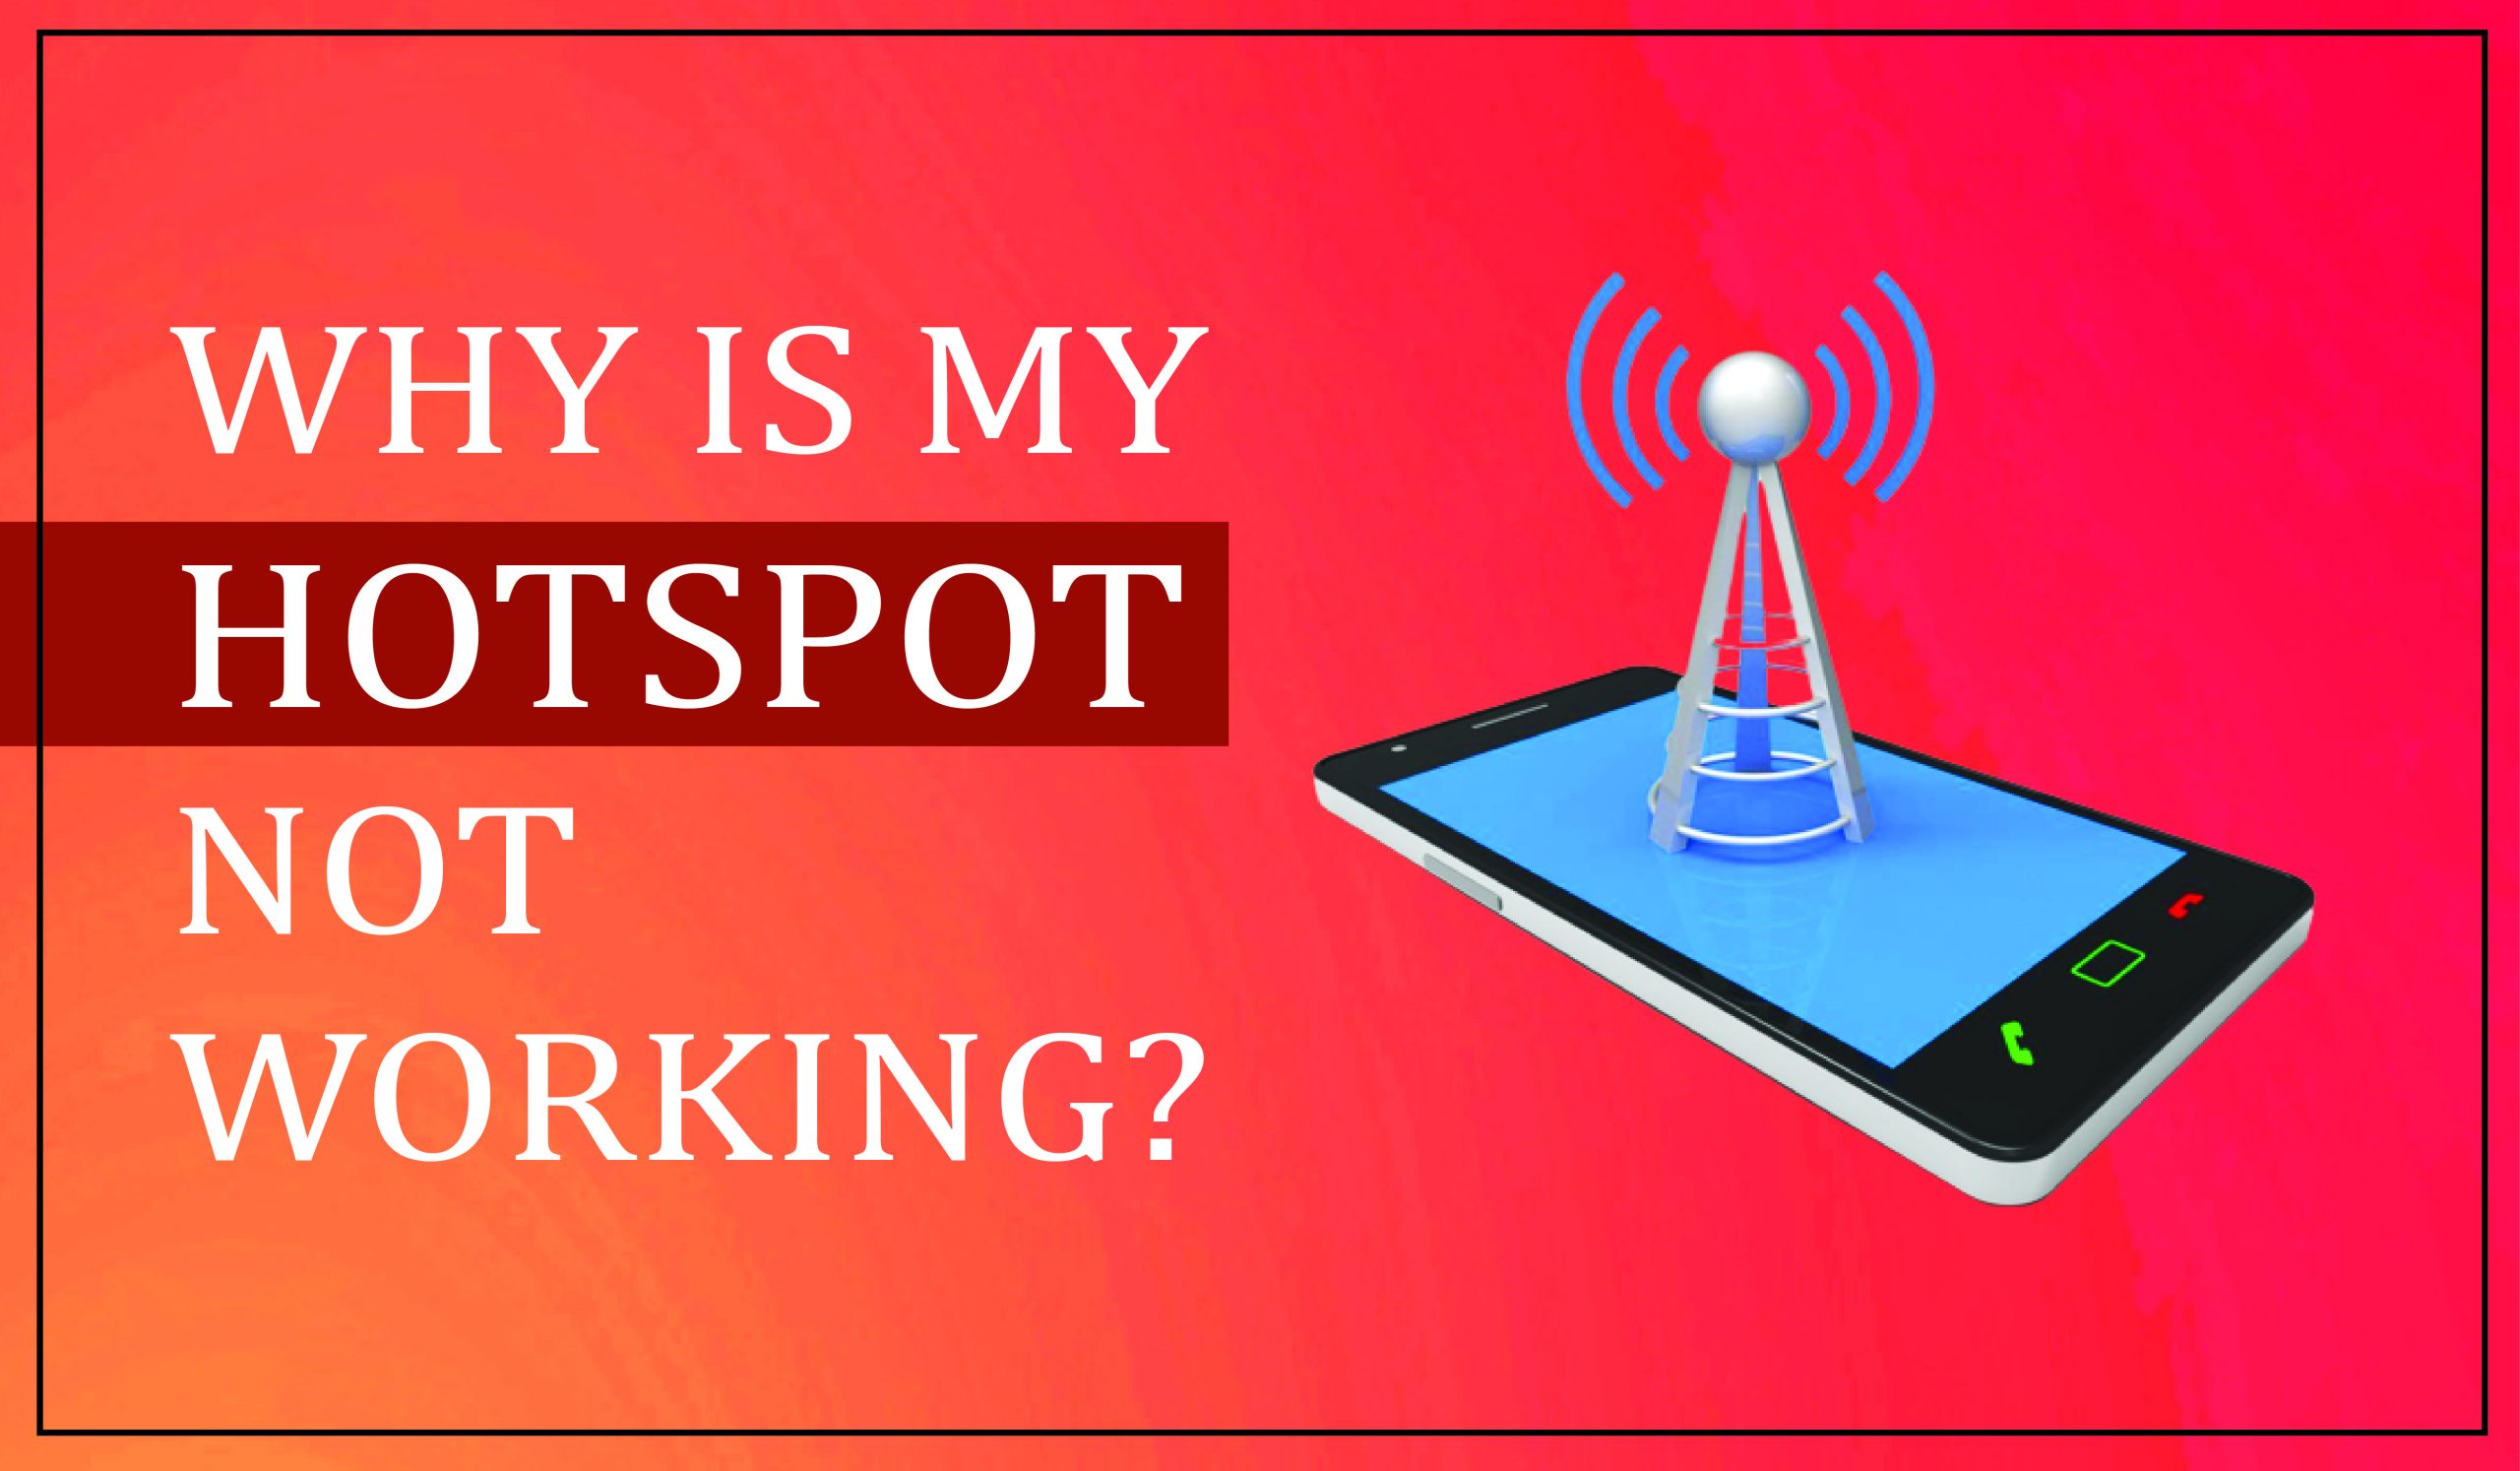 Why Is My Hotspot Not Working?